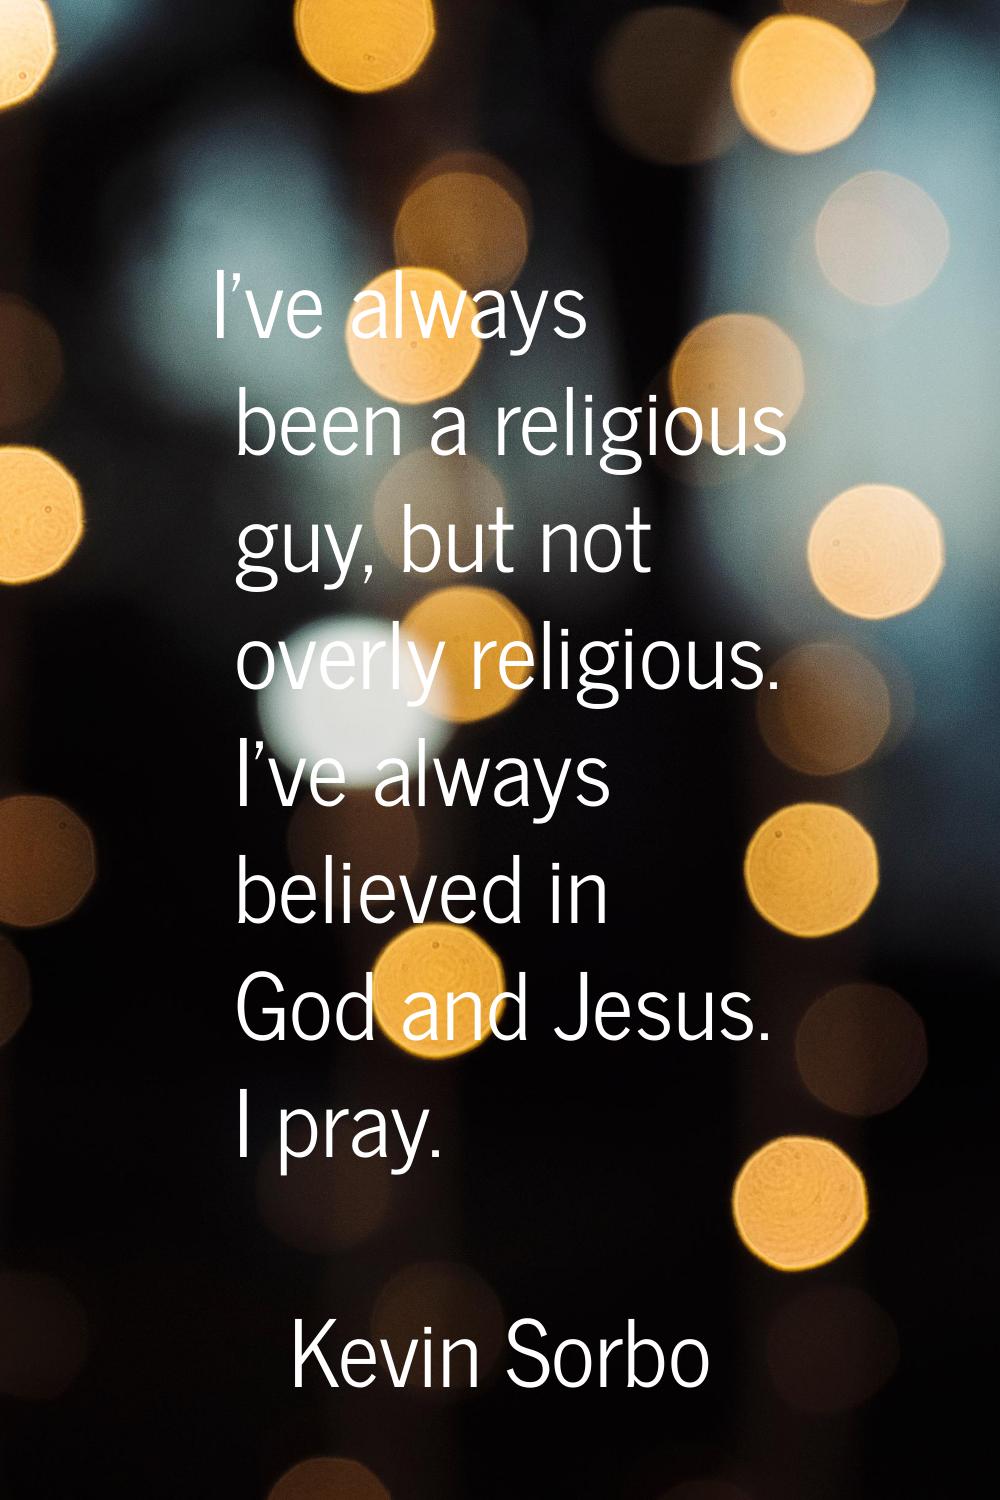 I've always been a religious guy, but not overly religious. I've always believed in God and Jesus. 